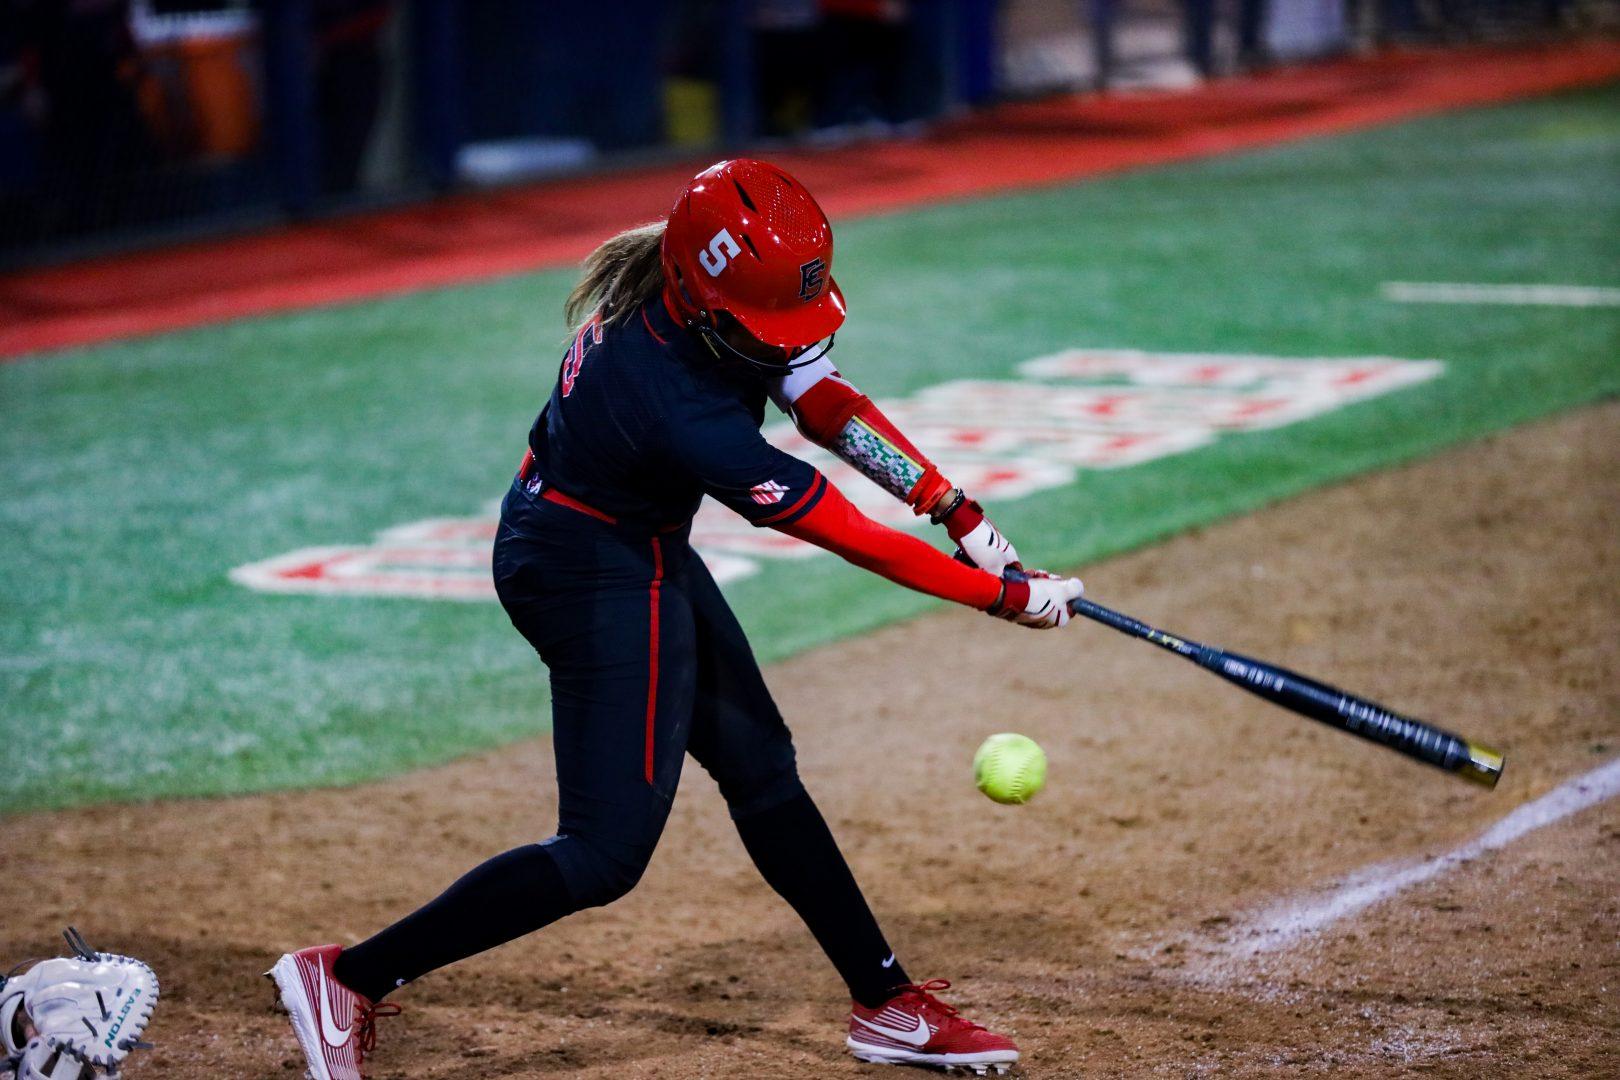 Freshman Alesia Denby (5) at-bat against Cal Poly during the Fresno State Kickoff Classic on Feb. 14, 2020 (Vendila Yang/The Collegian)